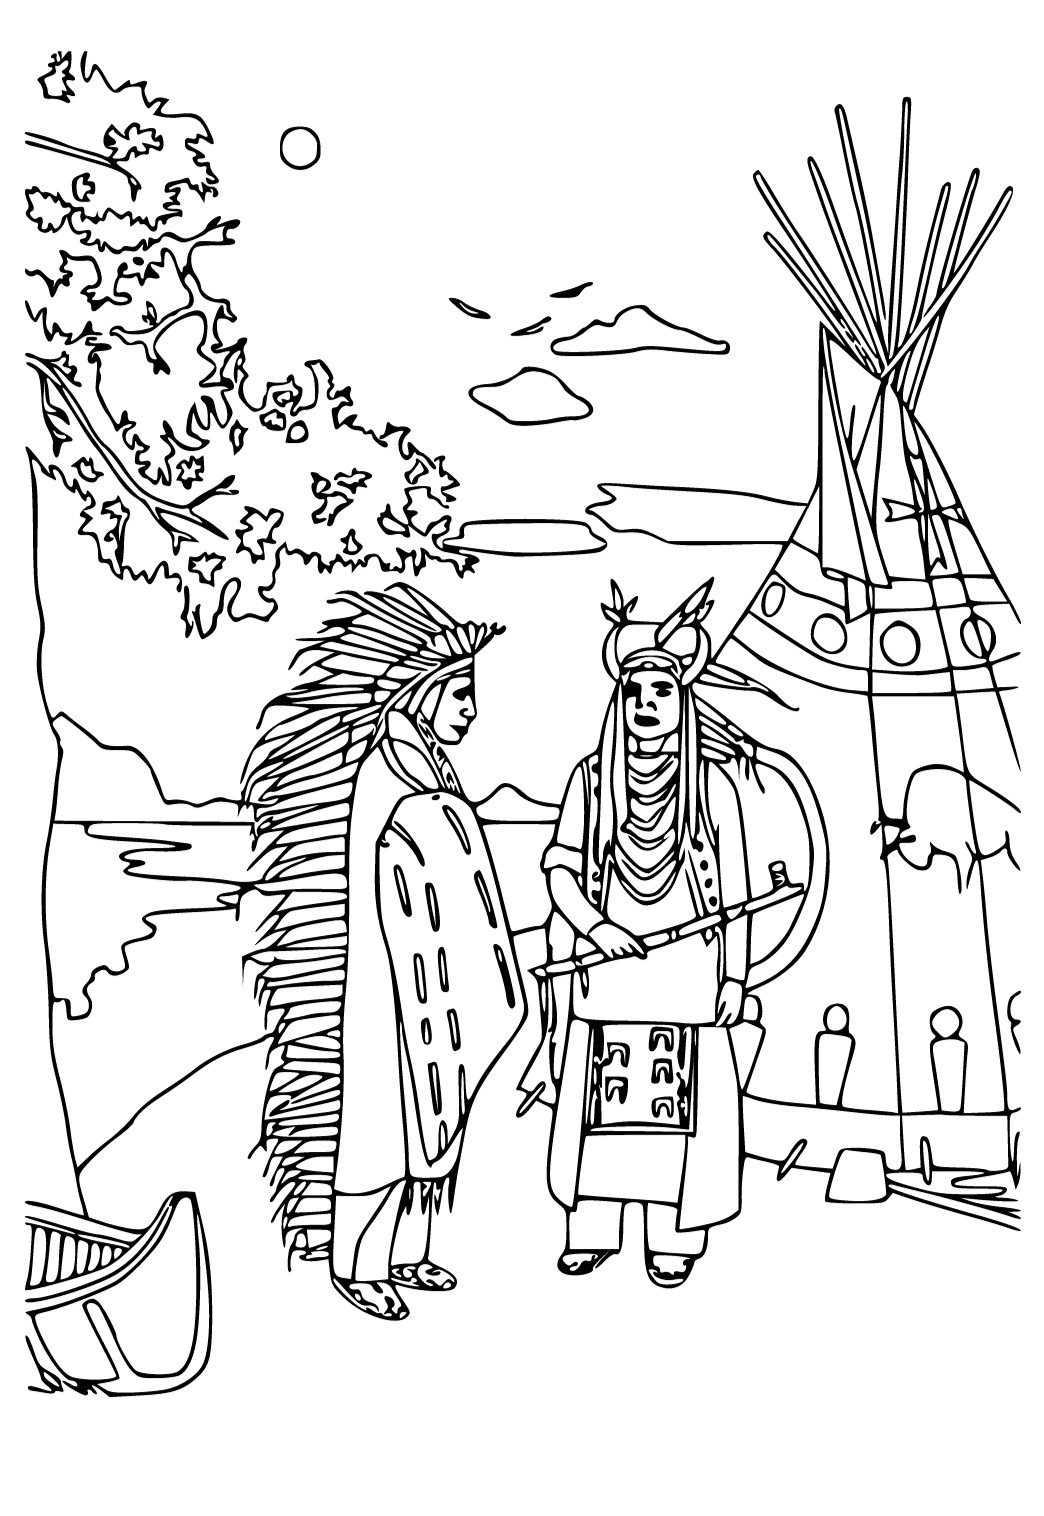 Free printable native american house coloring page for adults and kids